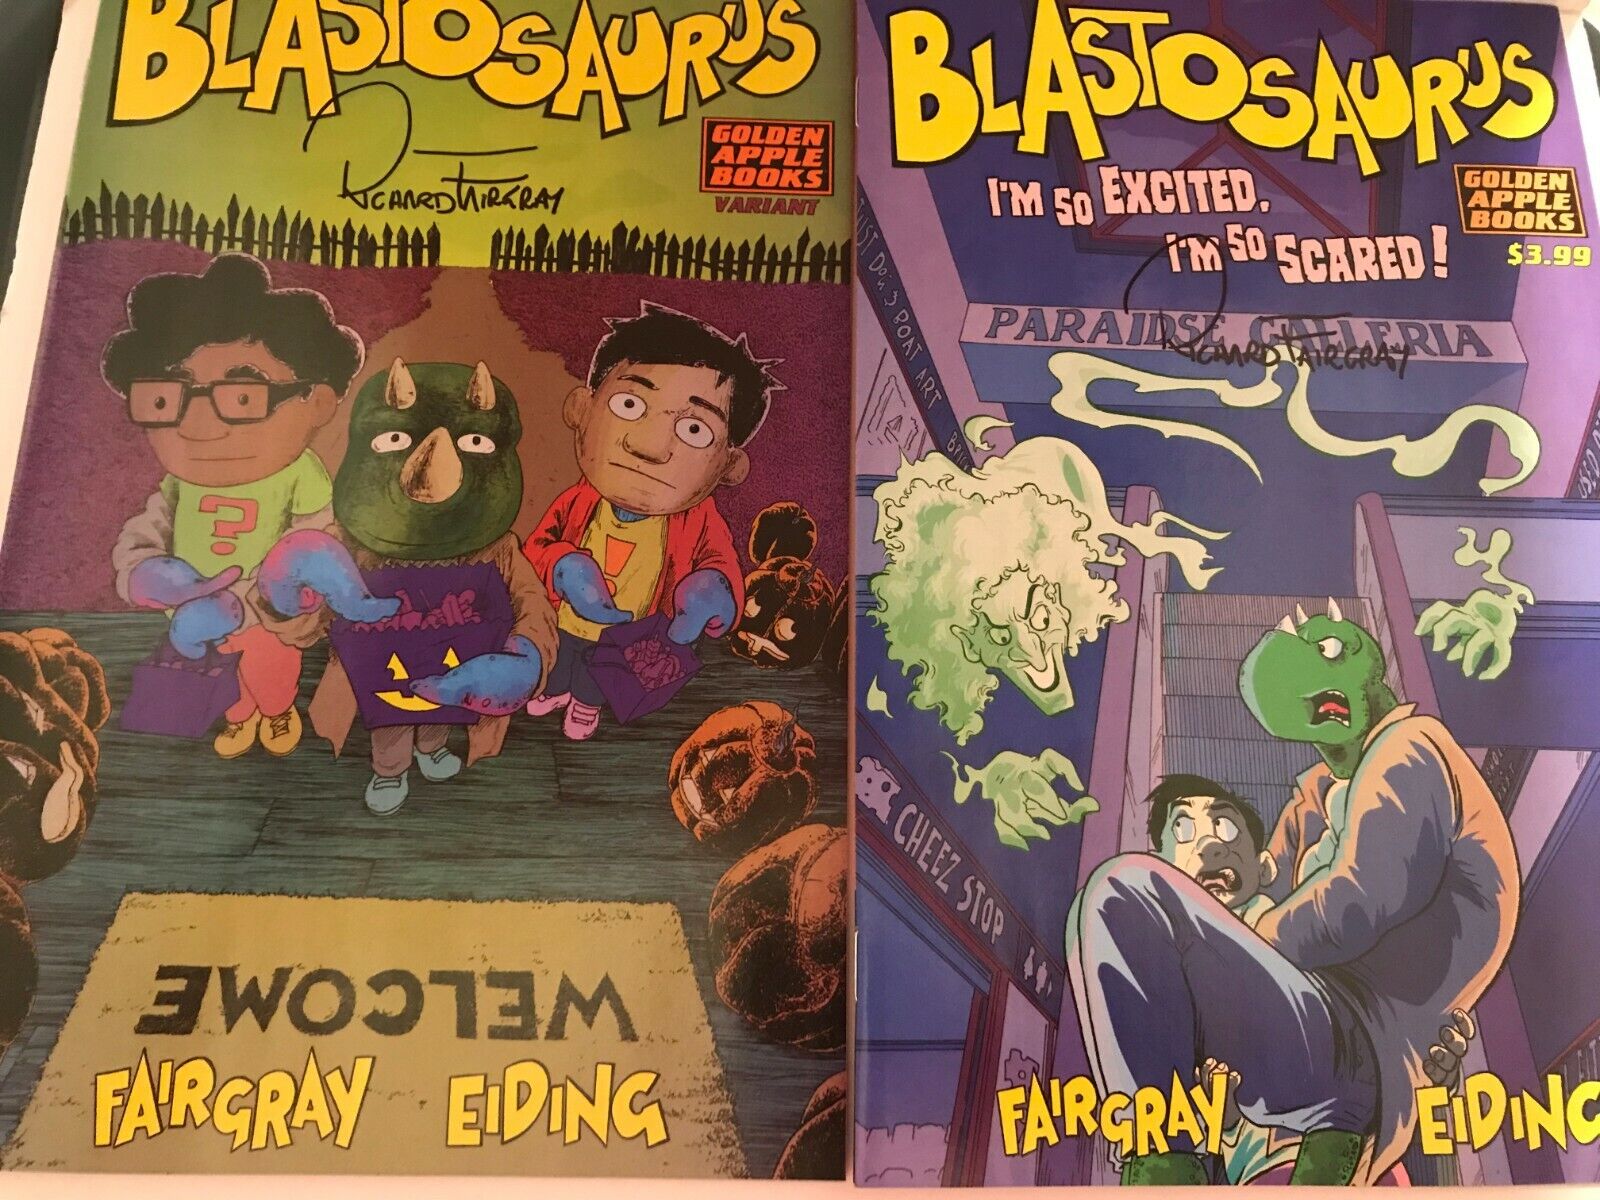 2019 Los Angeles Comic Con Exclusive 2 Issues Blastosaurs Signed